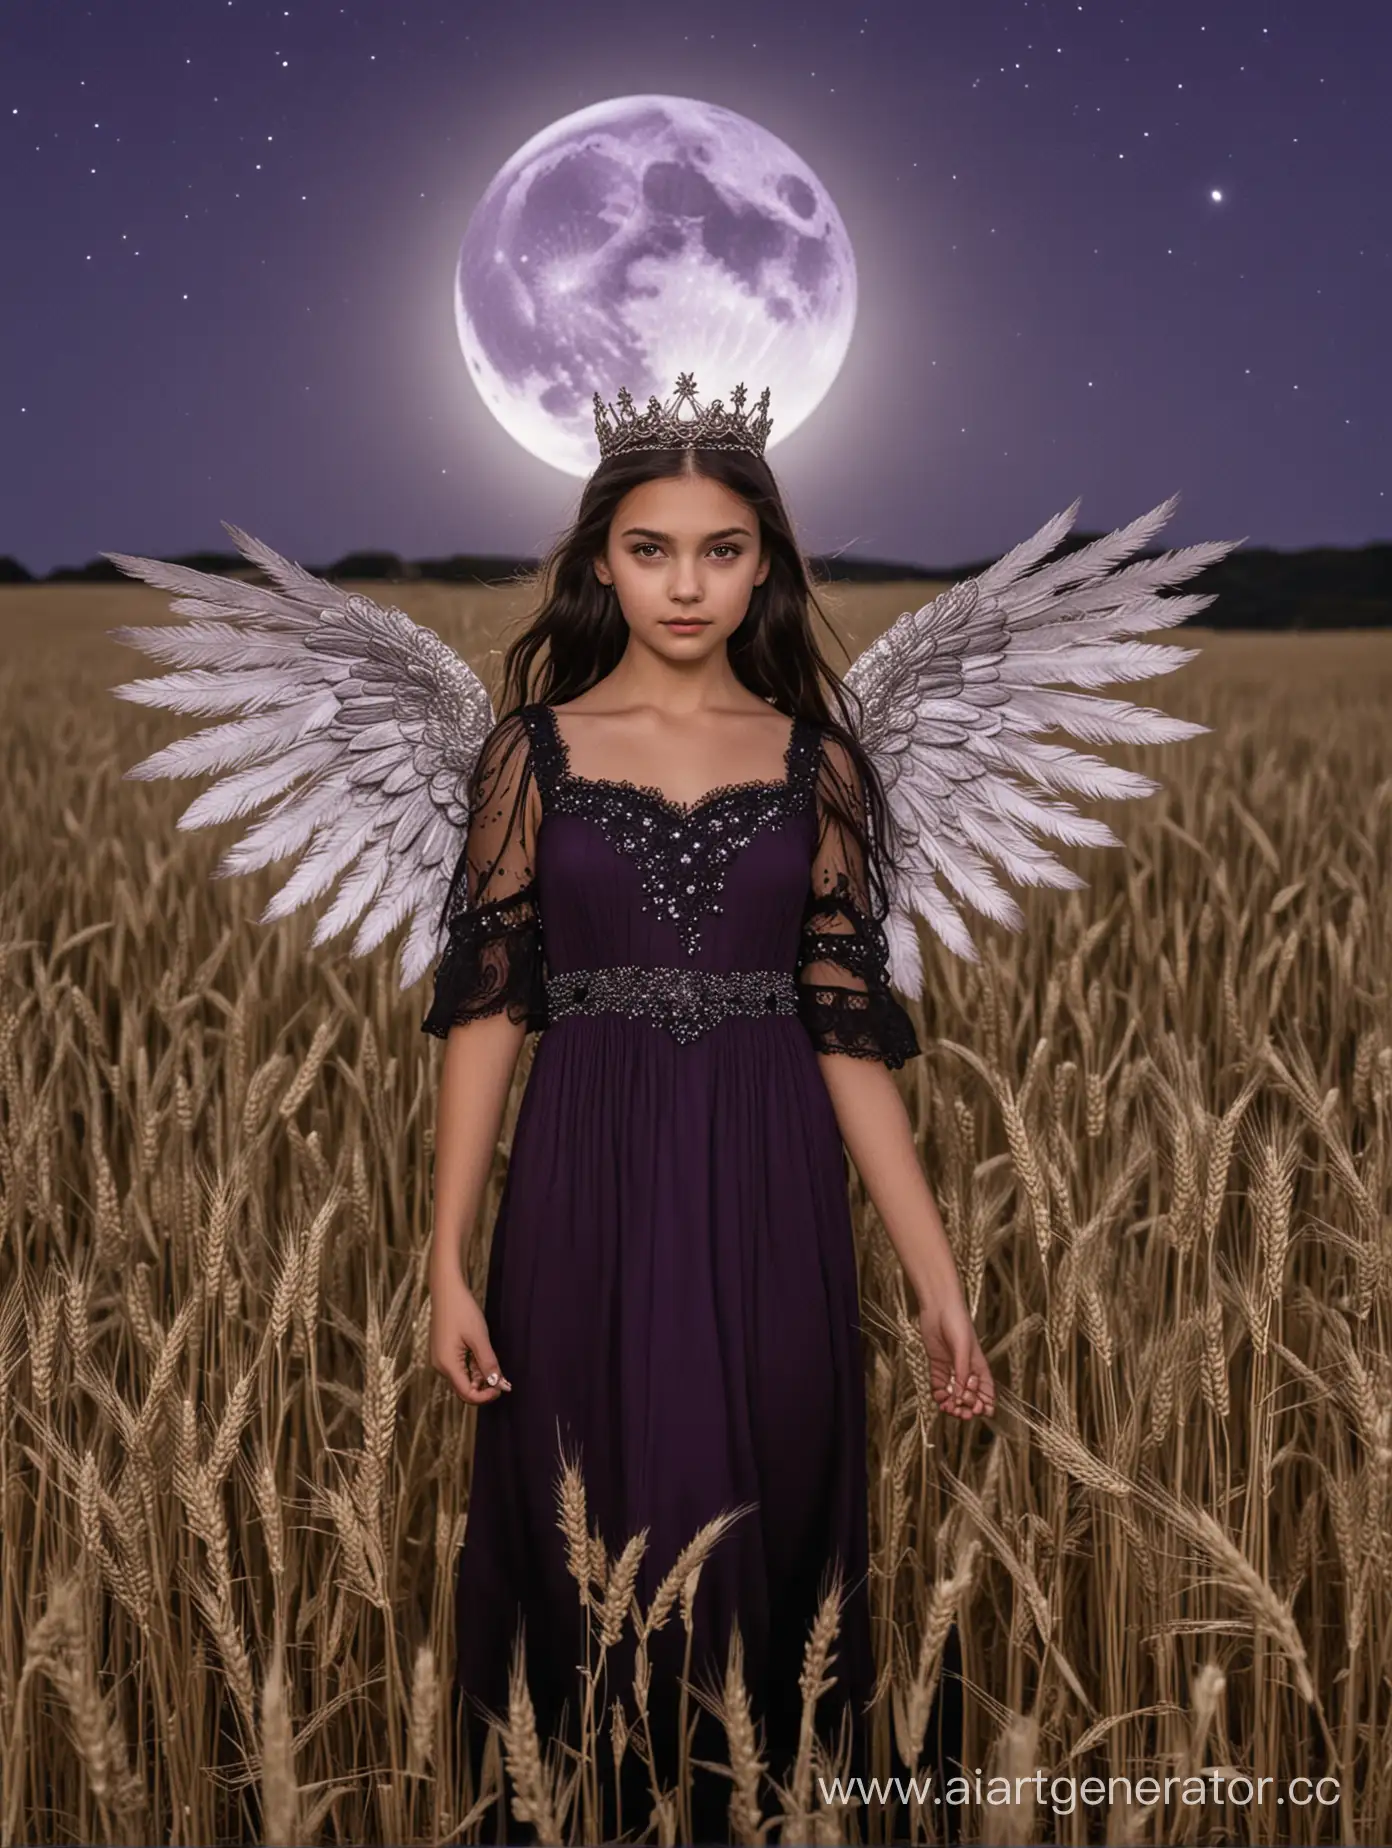 DarkHaired-Girl-Standing-in-Moonlit-Wheat-Field-with-Angelic-Wings